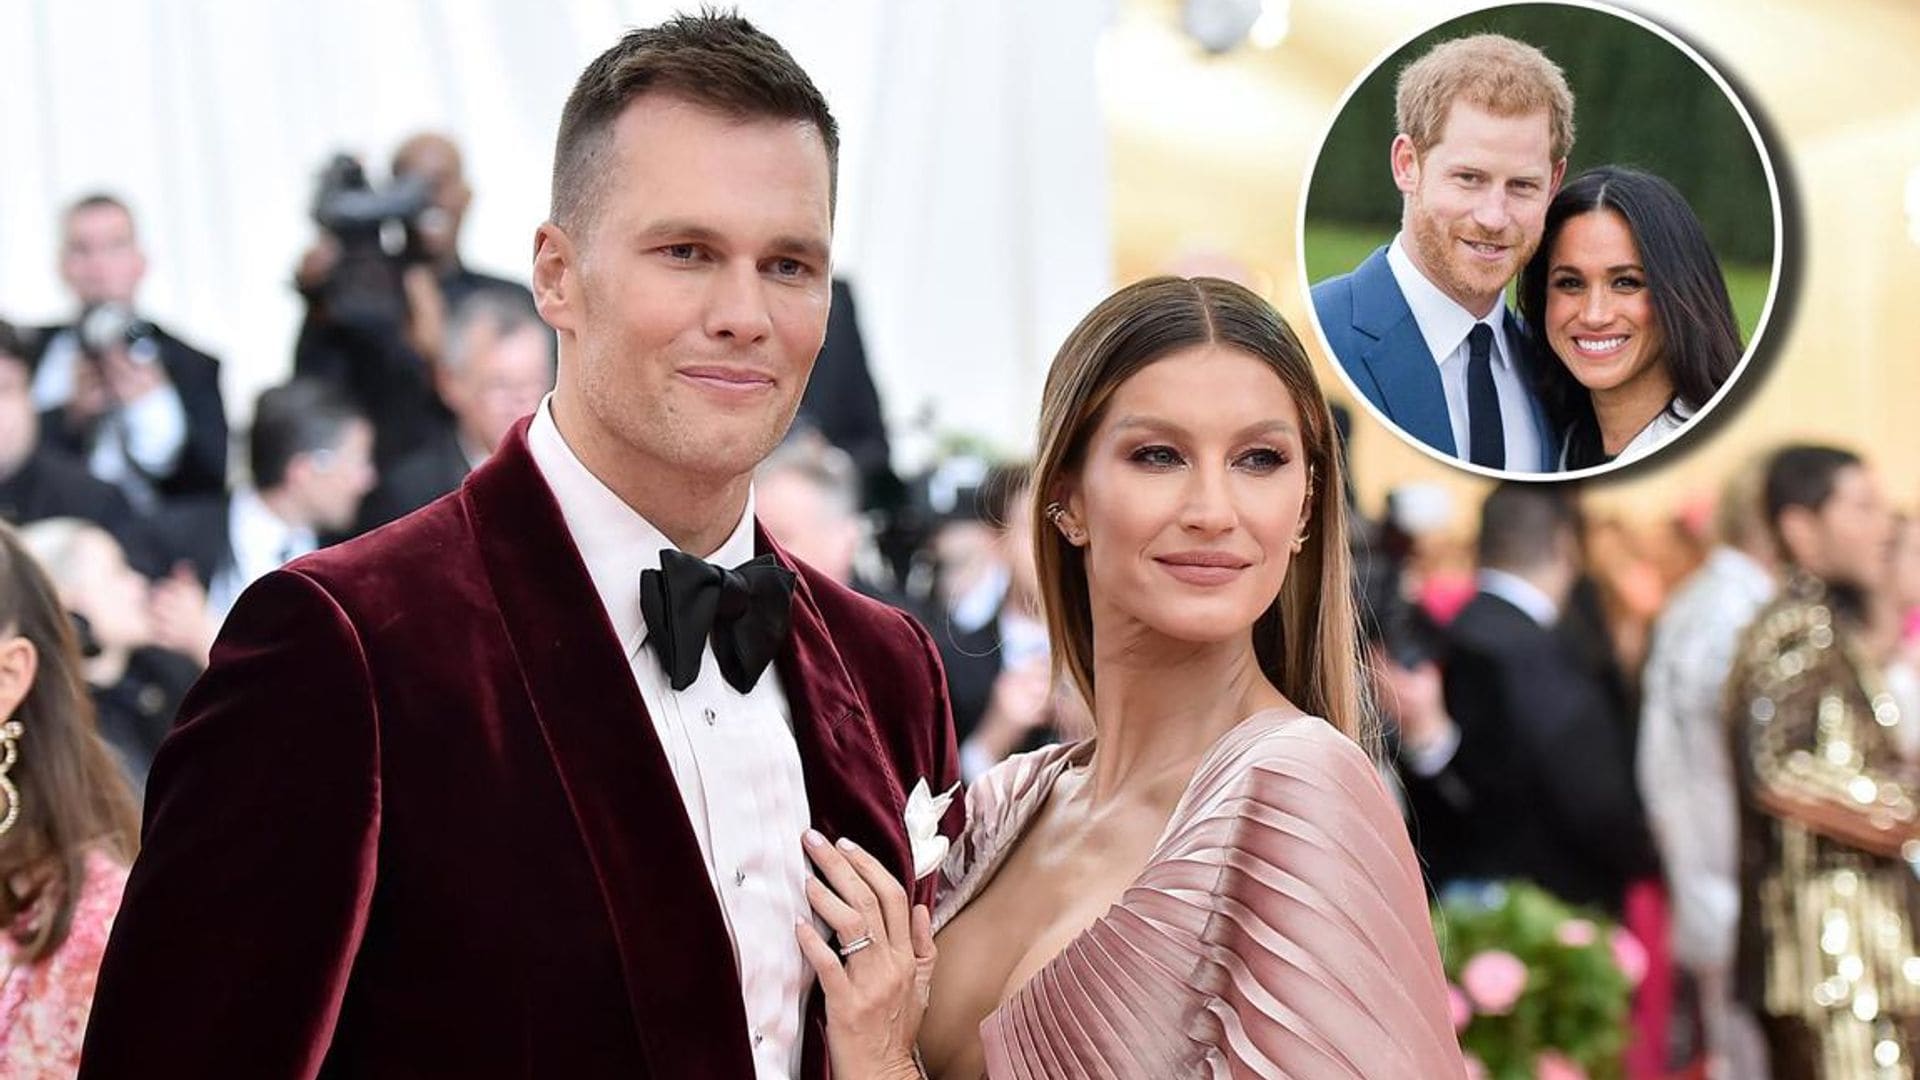 Gisele Bündchen and Tom Brady channel Meghan and Harry with loved-up pic